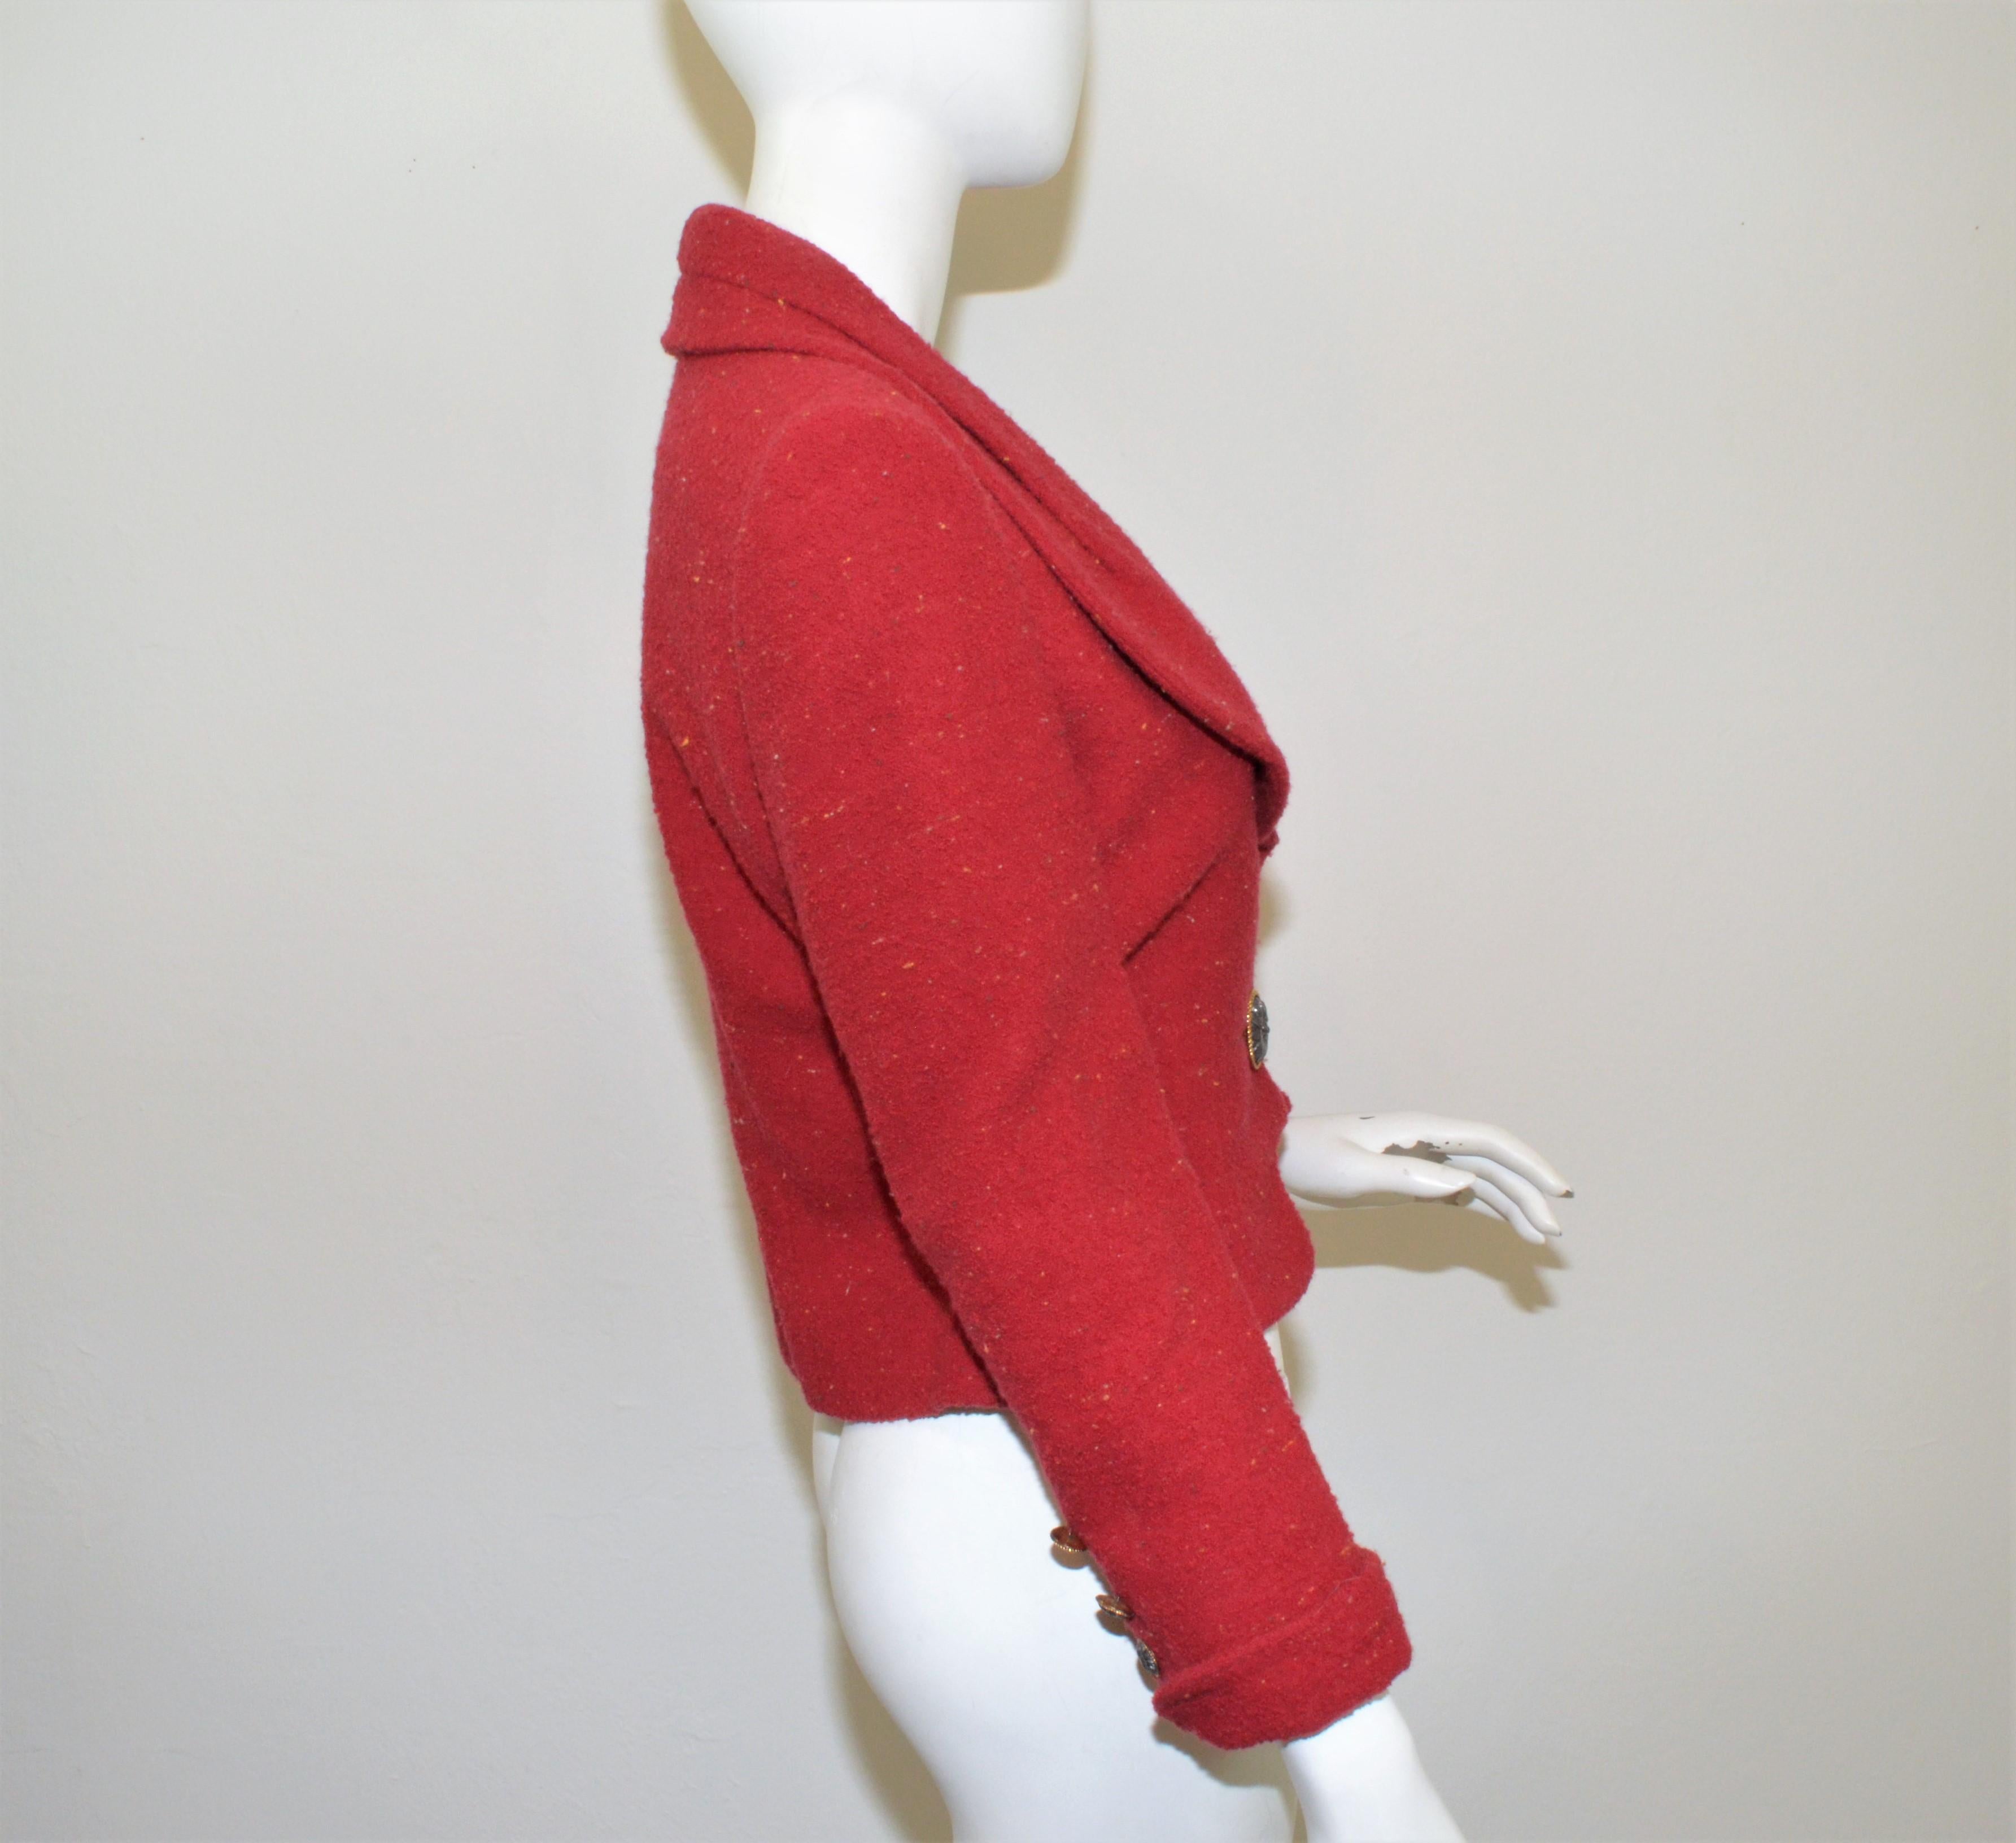 Vintage Karl Lagerfeld cropped jacket featured in a red-maroon color with a single button closure and buttons at the cuffs of the sleeves. Jacket is fully lined, composed with wool and polyester, labeled size 40, made in France.

Measurements:
Bust